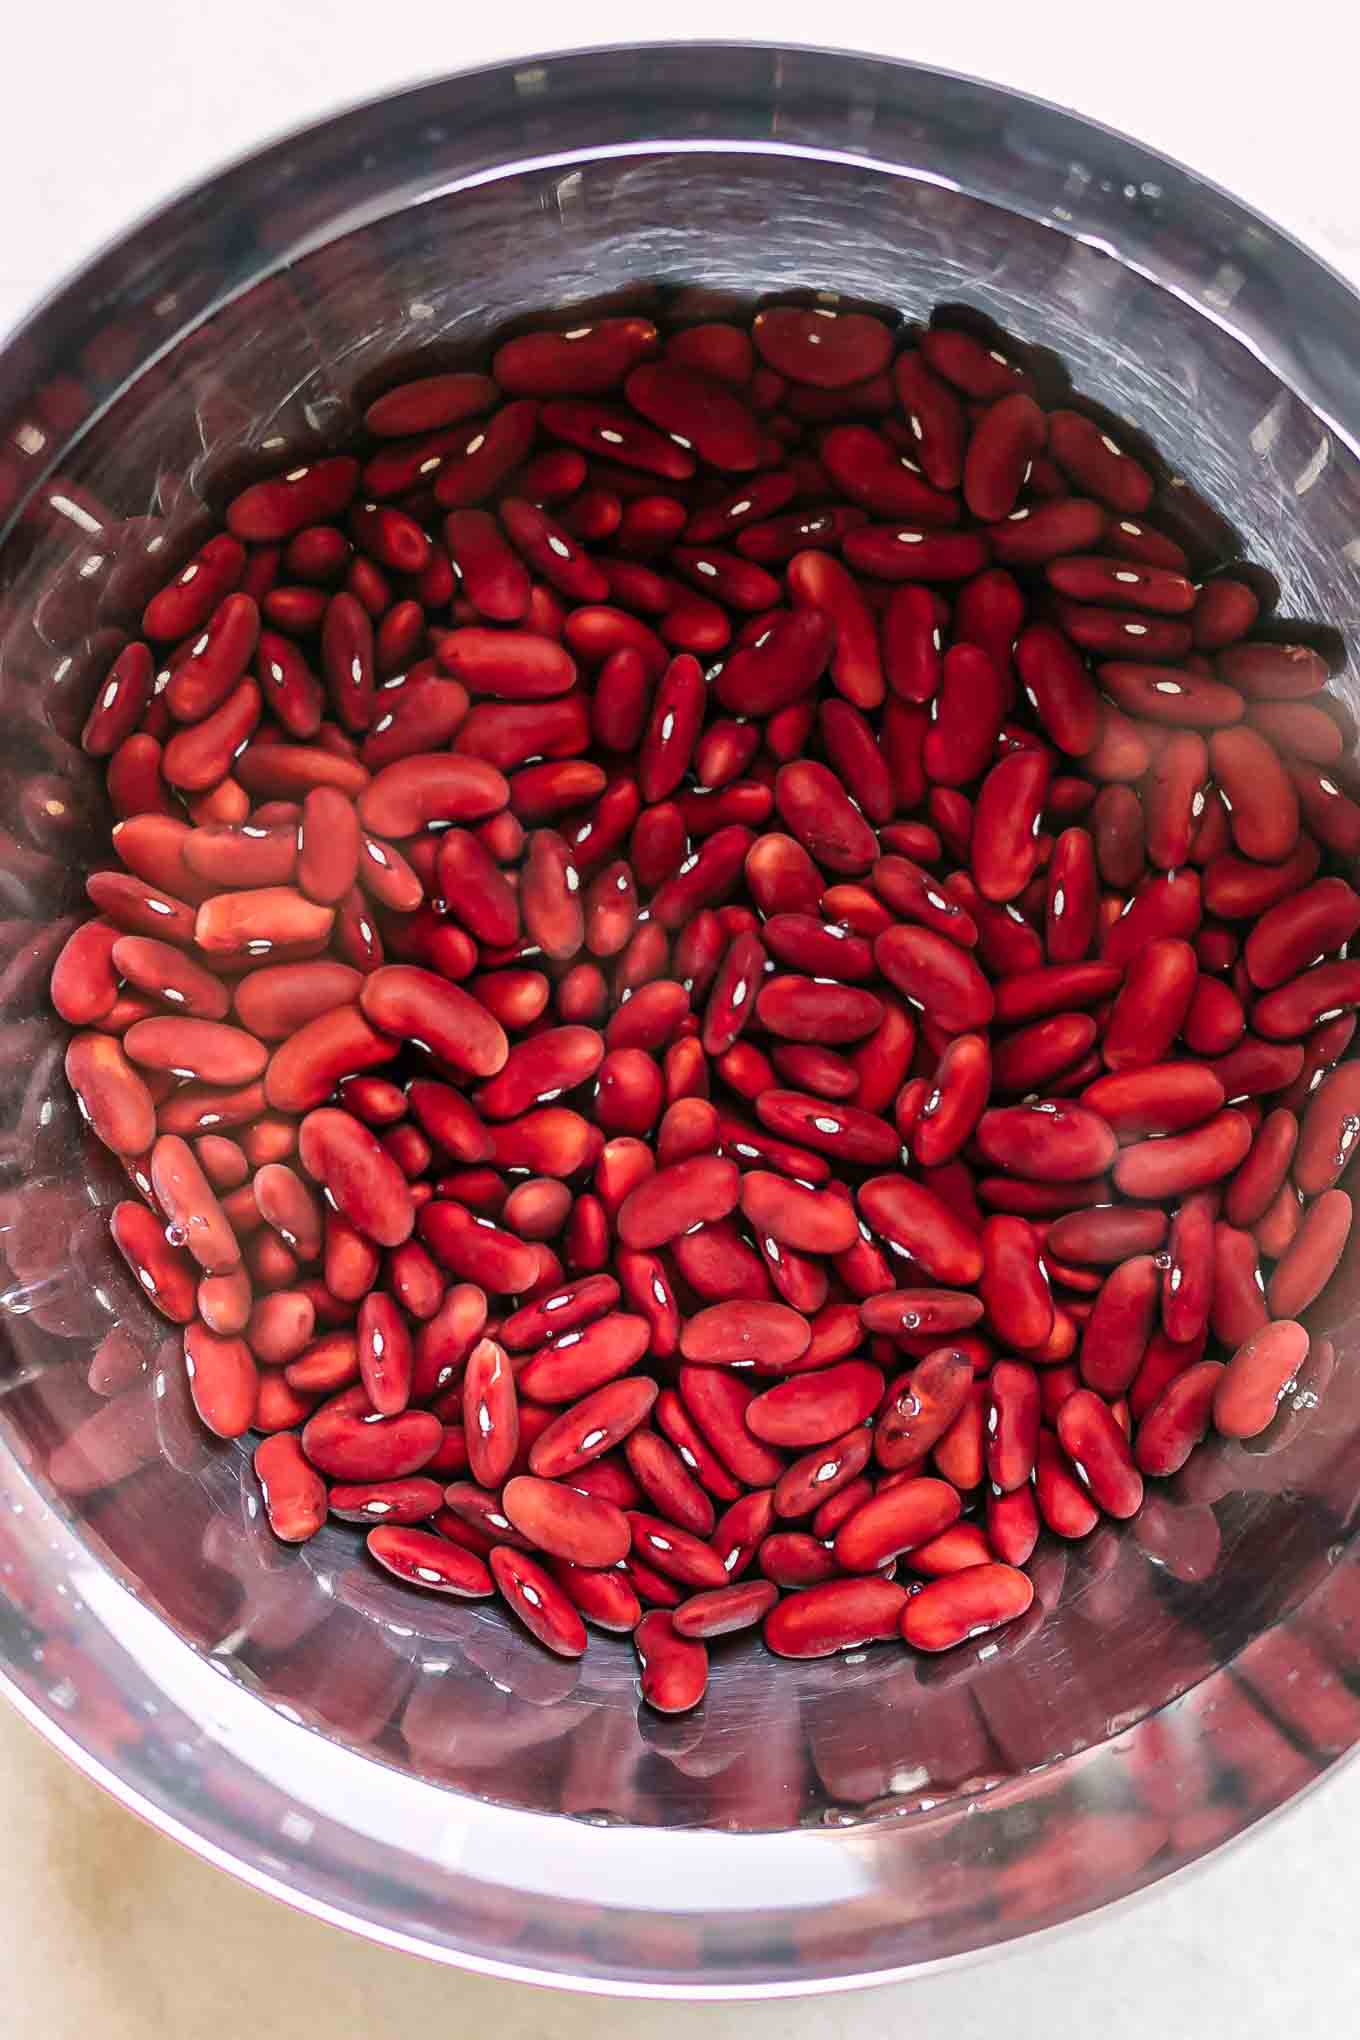 kidney beans soaking in water in a large mixing bowl